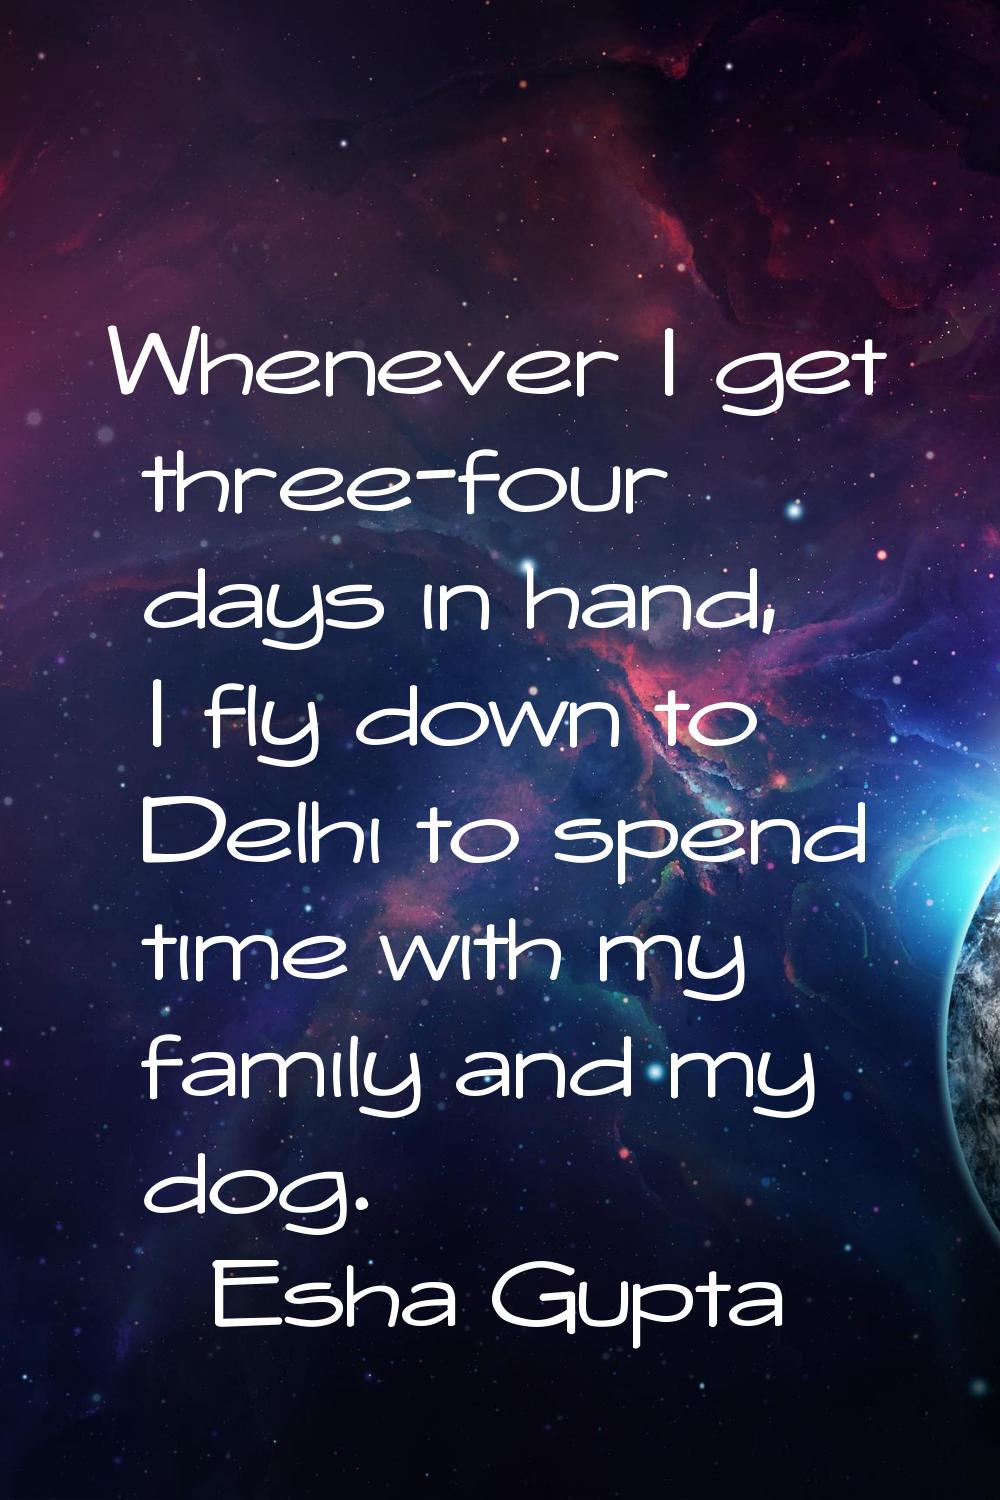 Whenever I get three-four days in hand, I fly down to Delhi to spend time with my family and my dog